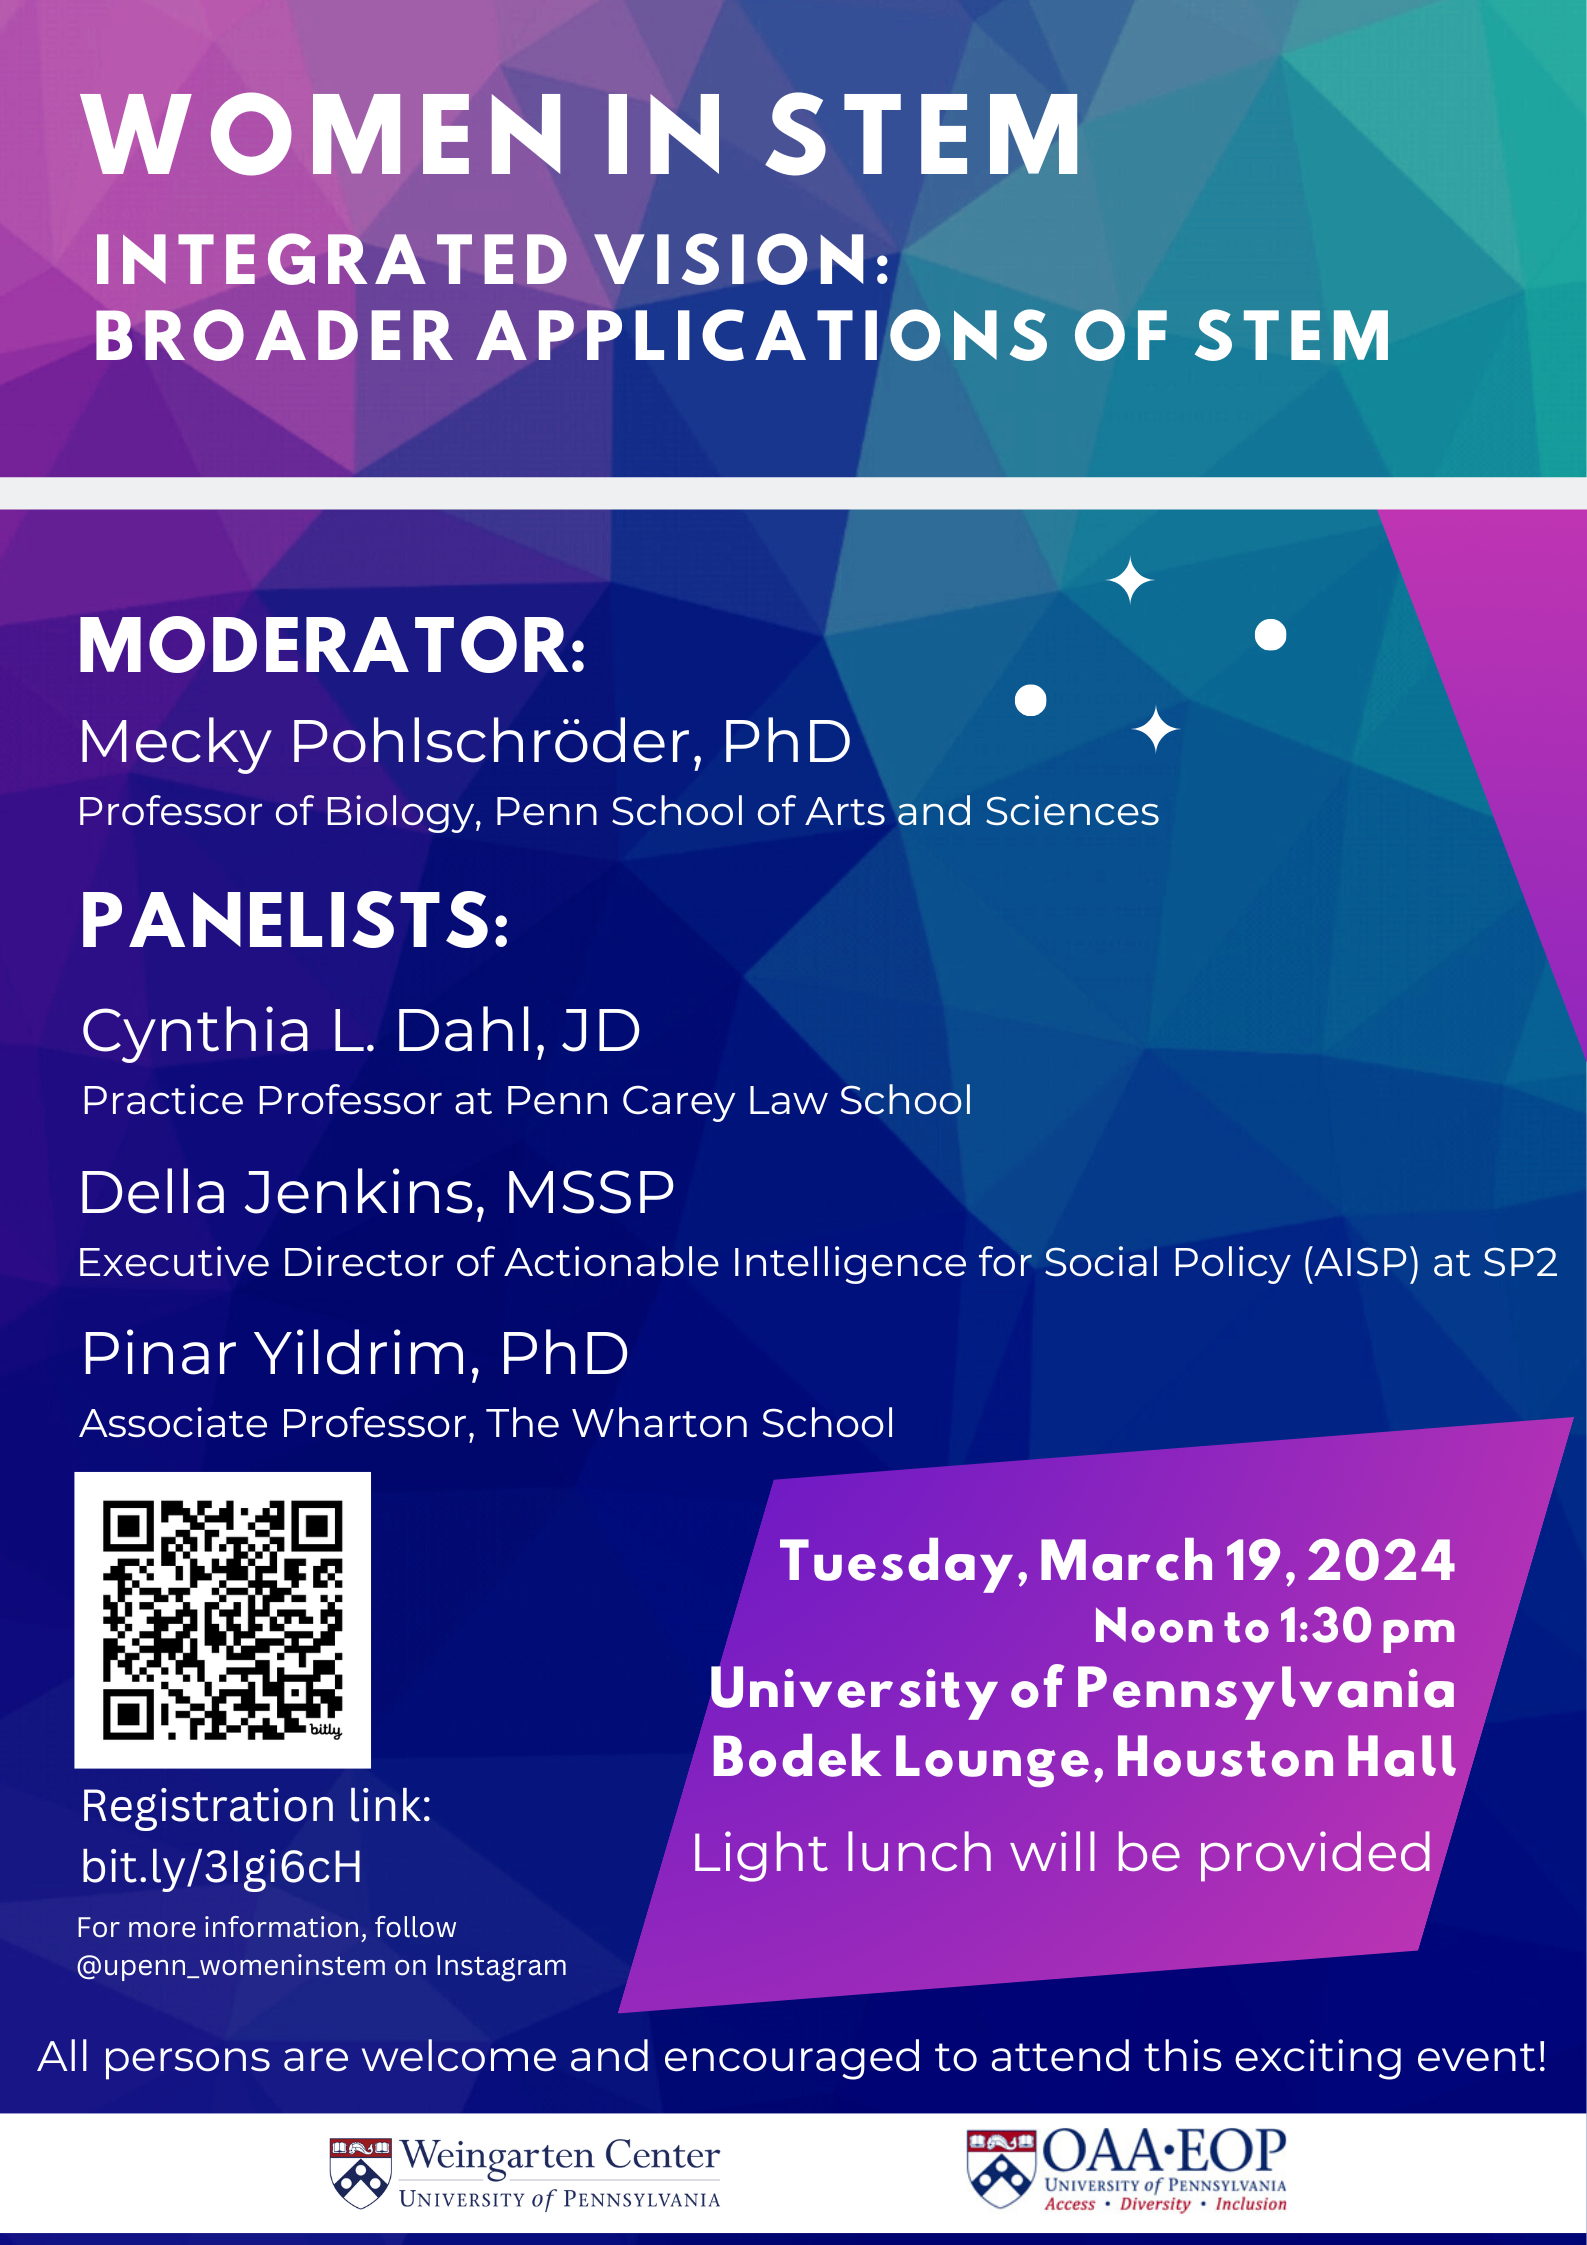 The Women in STEM 2024 event flyer (March 19th, 12-1:30, Houston Hall)